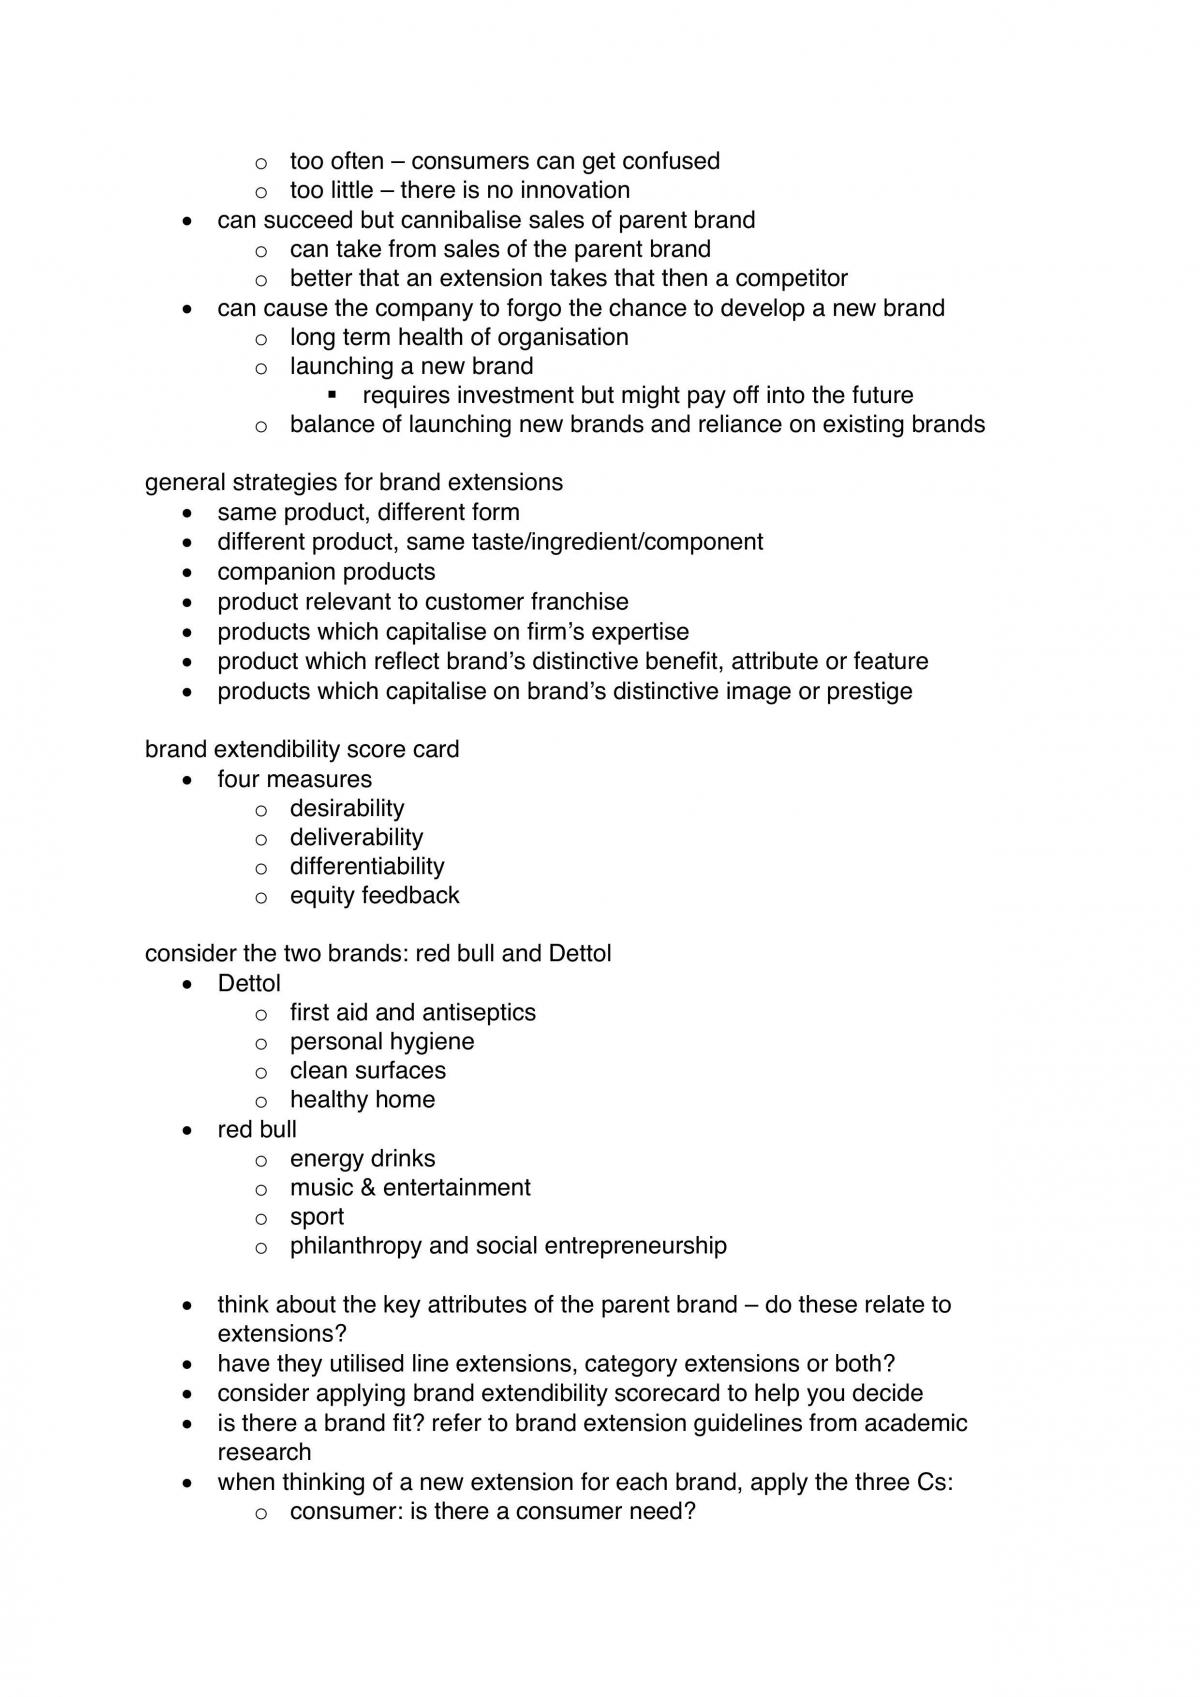 MKTG20006 Tutorial Notes - Page 15